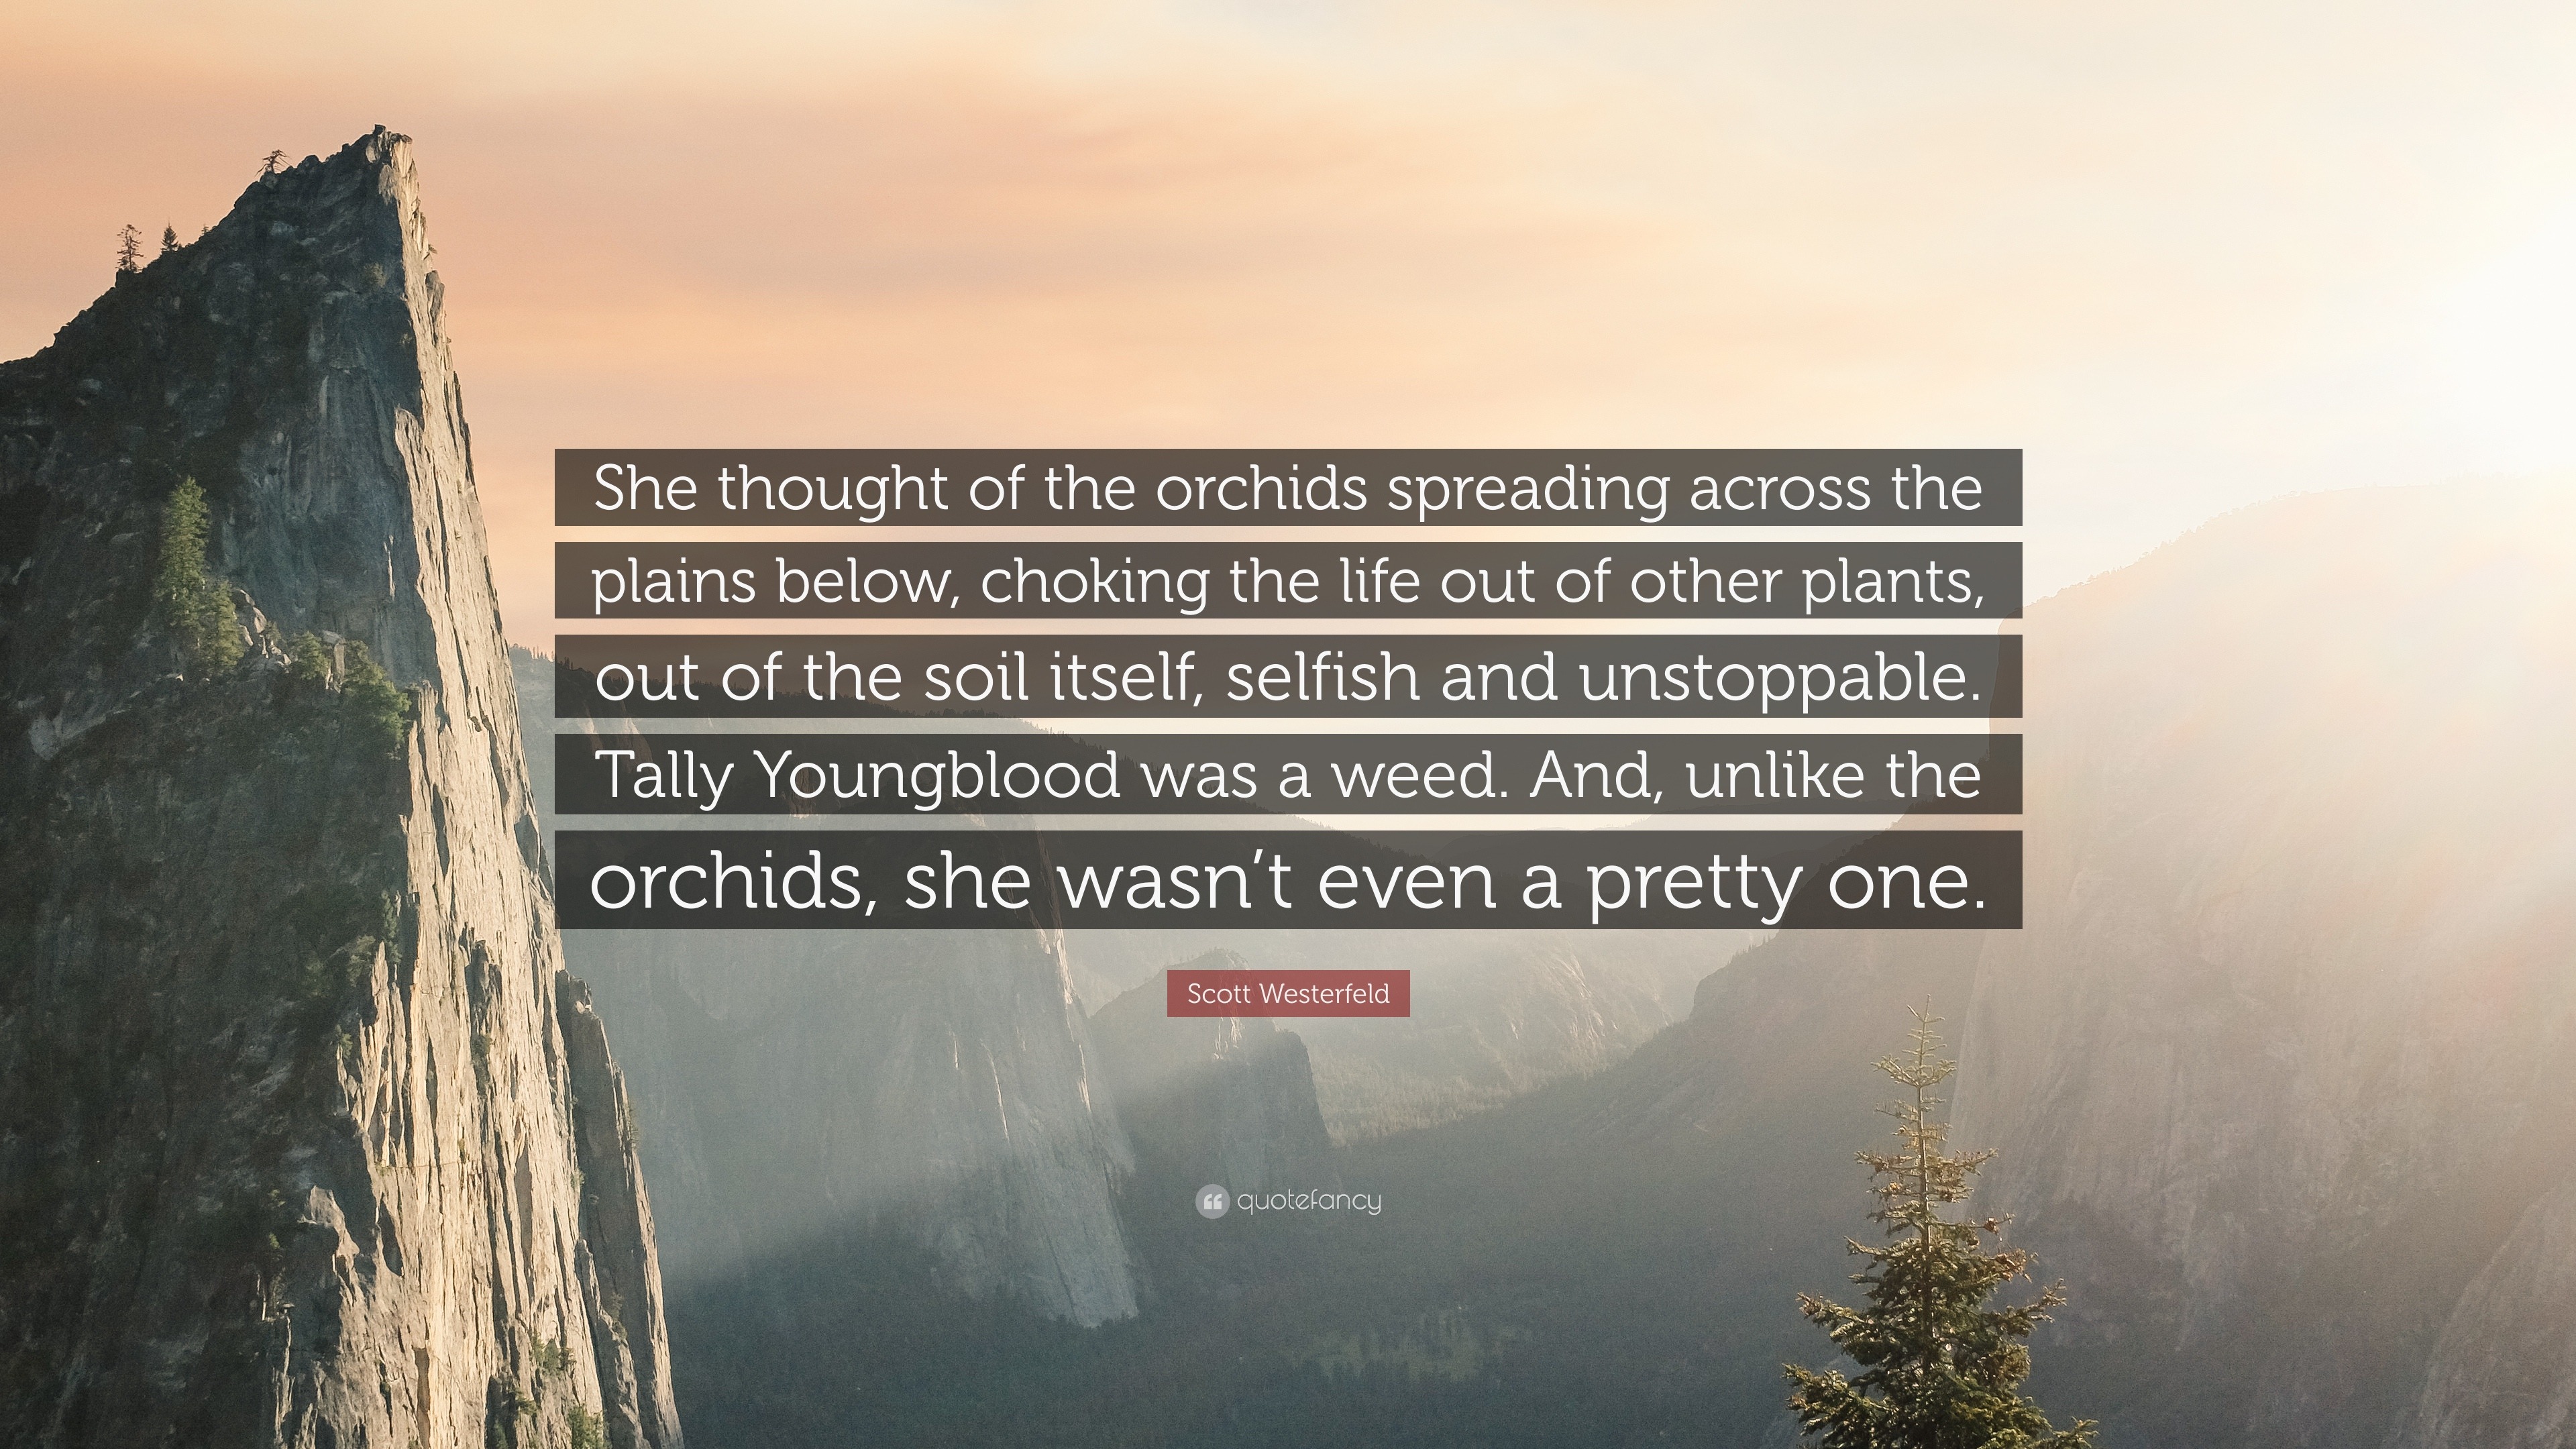 https://quotefancy.com/media/wallpaper/3840x2160/769813-Scott-Westerfeld-Quote-She-thought-of-the-orchids-spreading-across.jpg